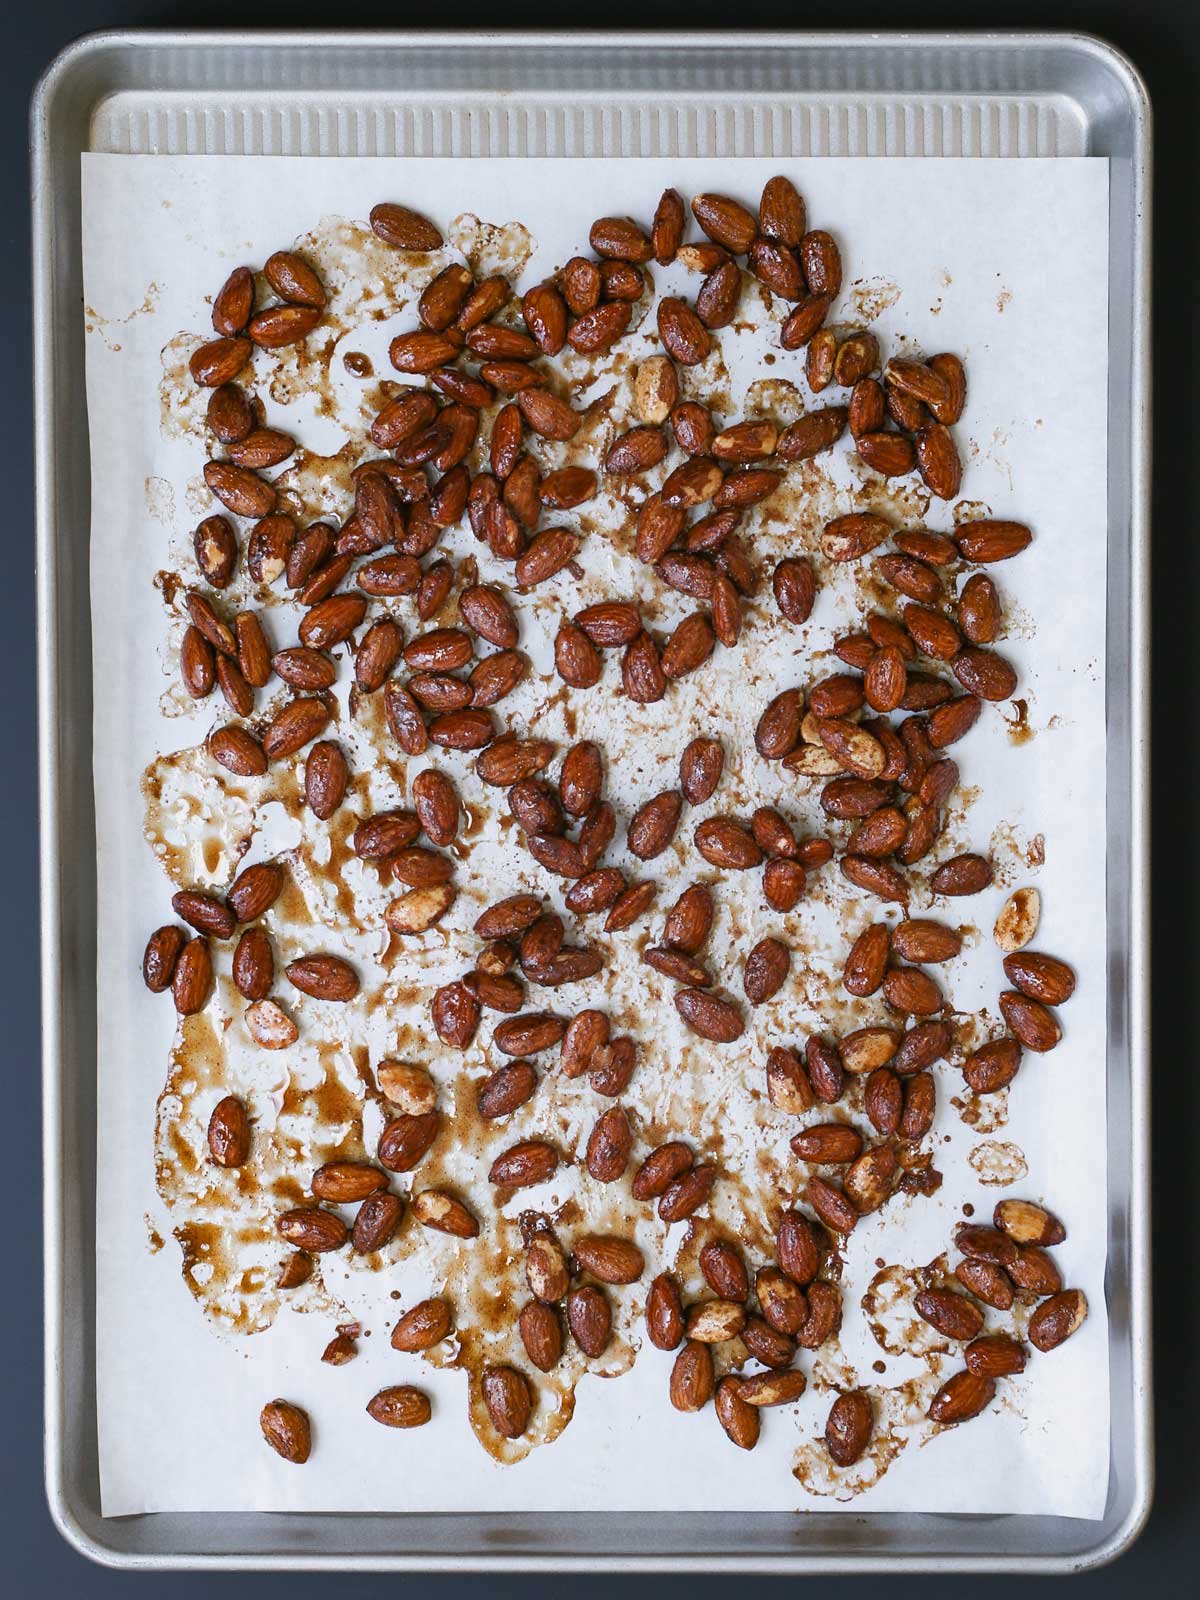 baked candied almonds on lined baking sheet.